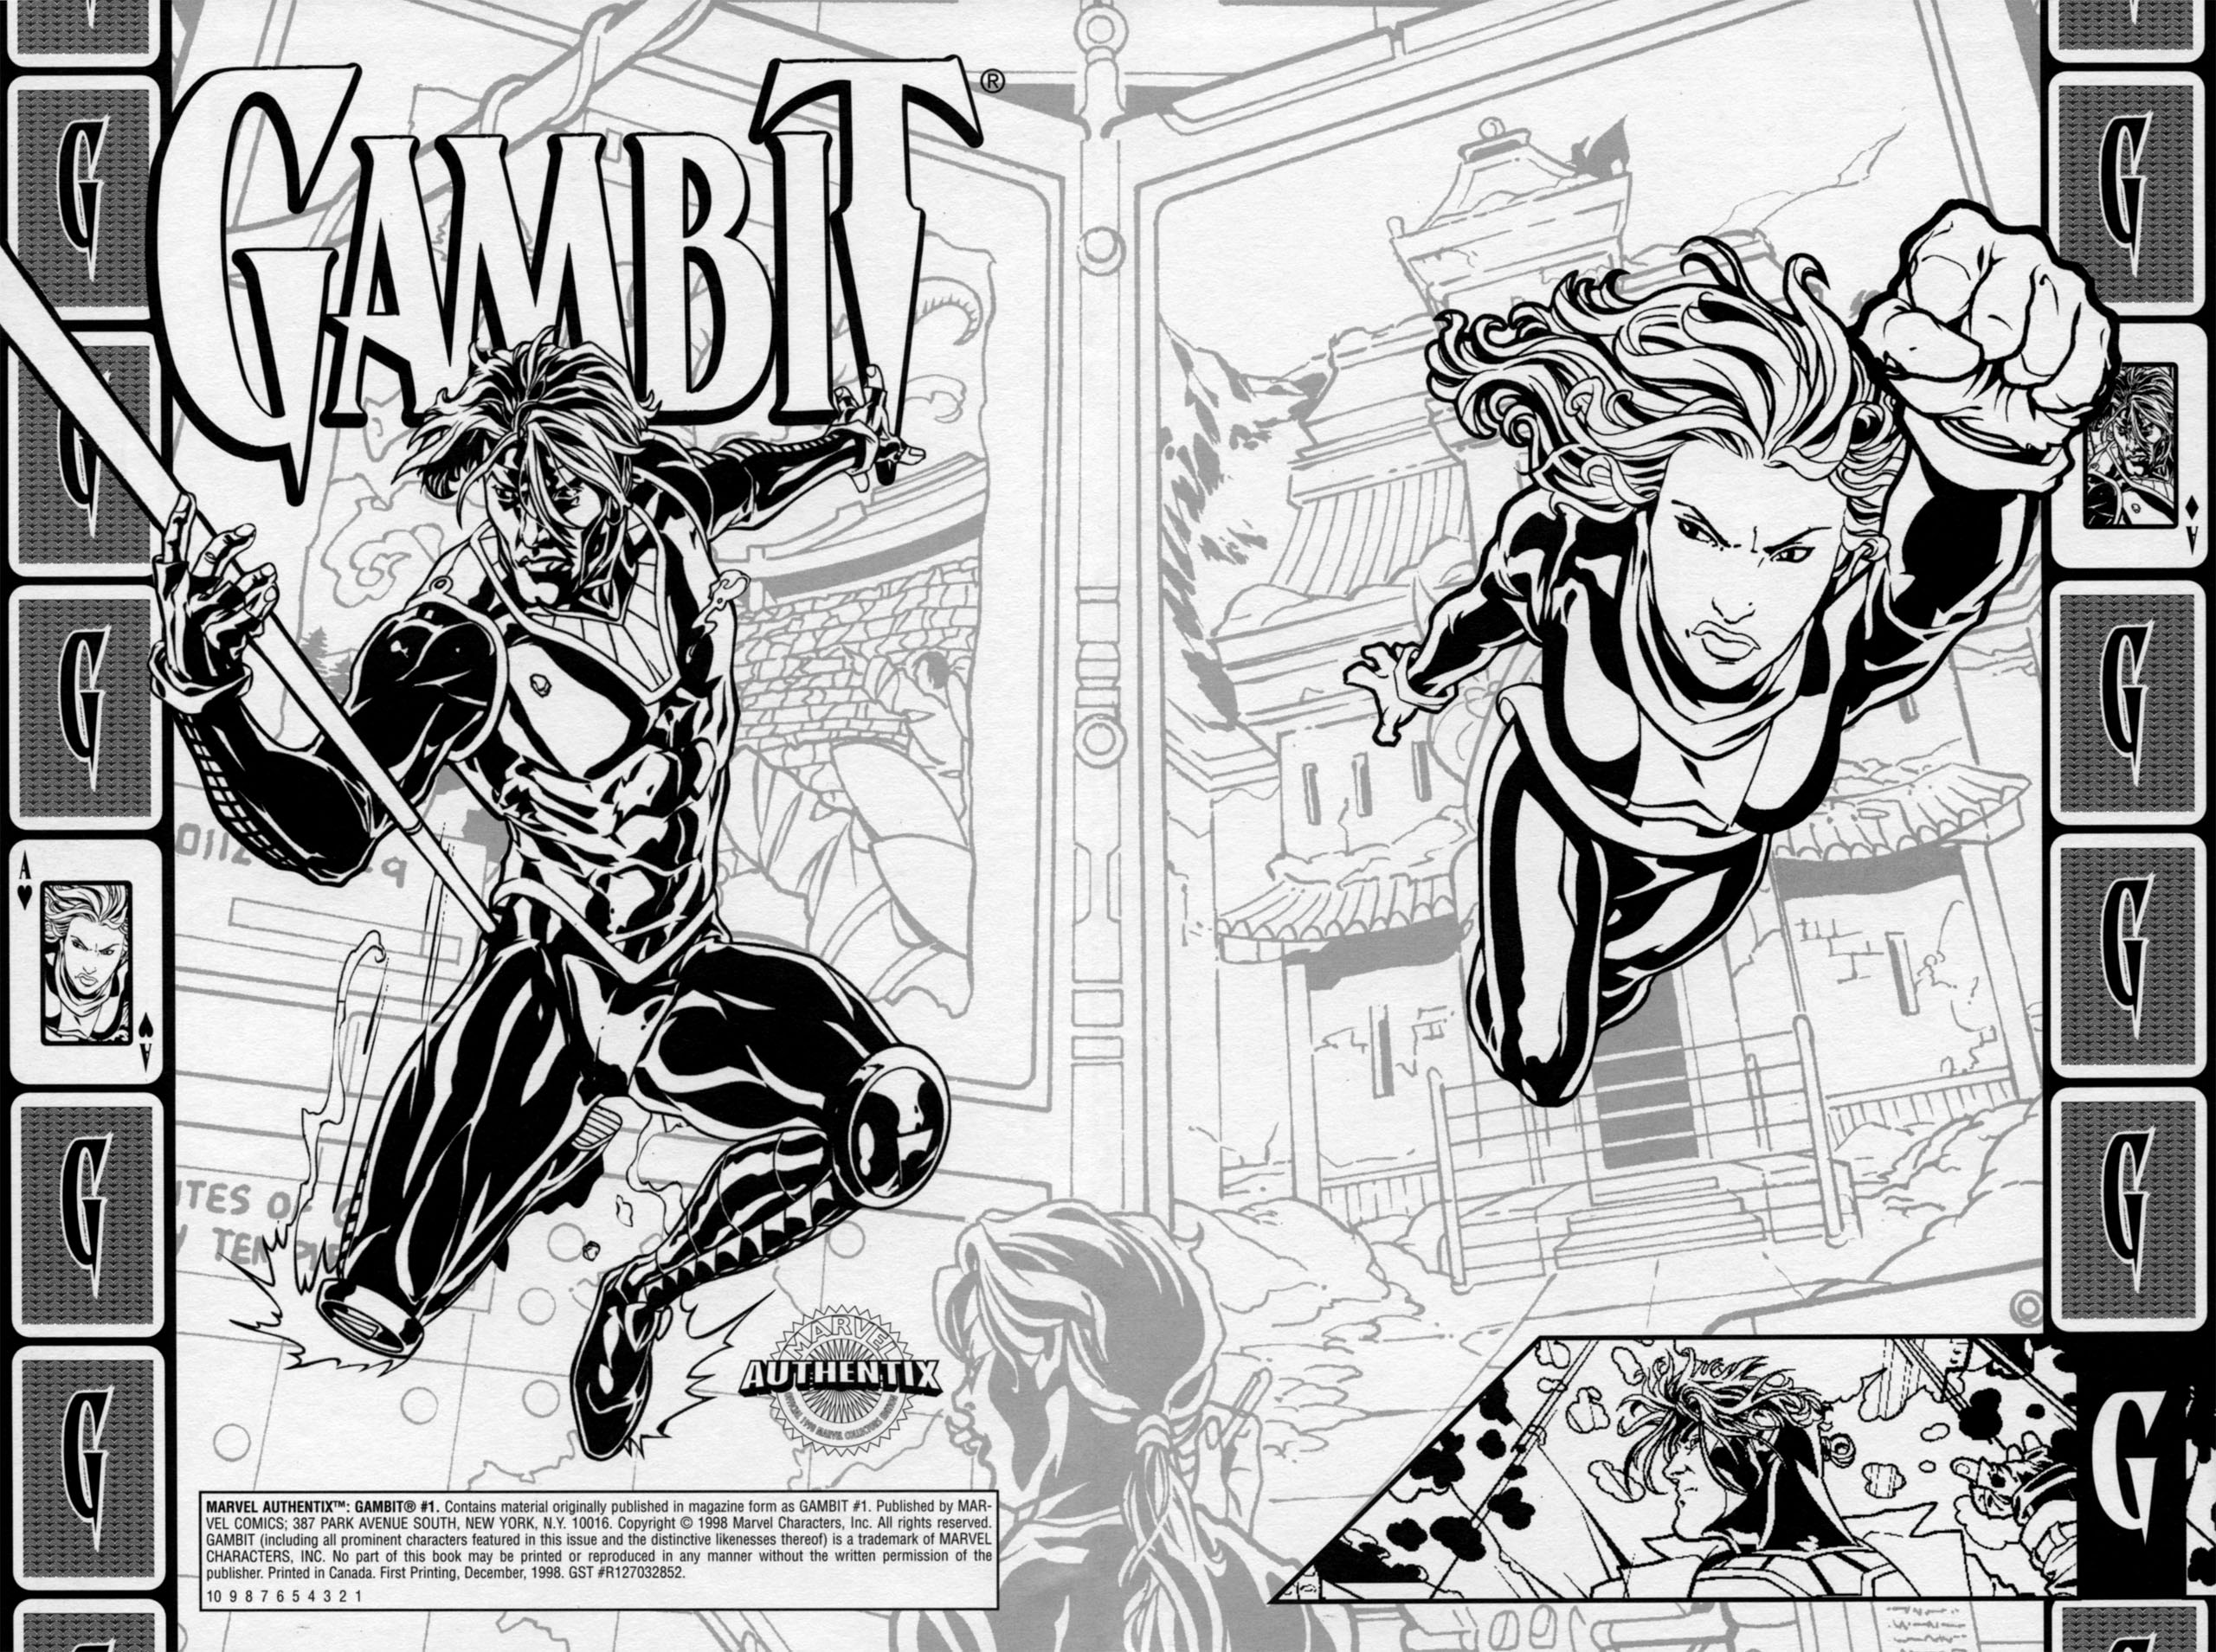 Gambit (1999) issue 1 (Marvel Authentix) - Page 2